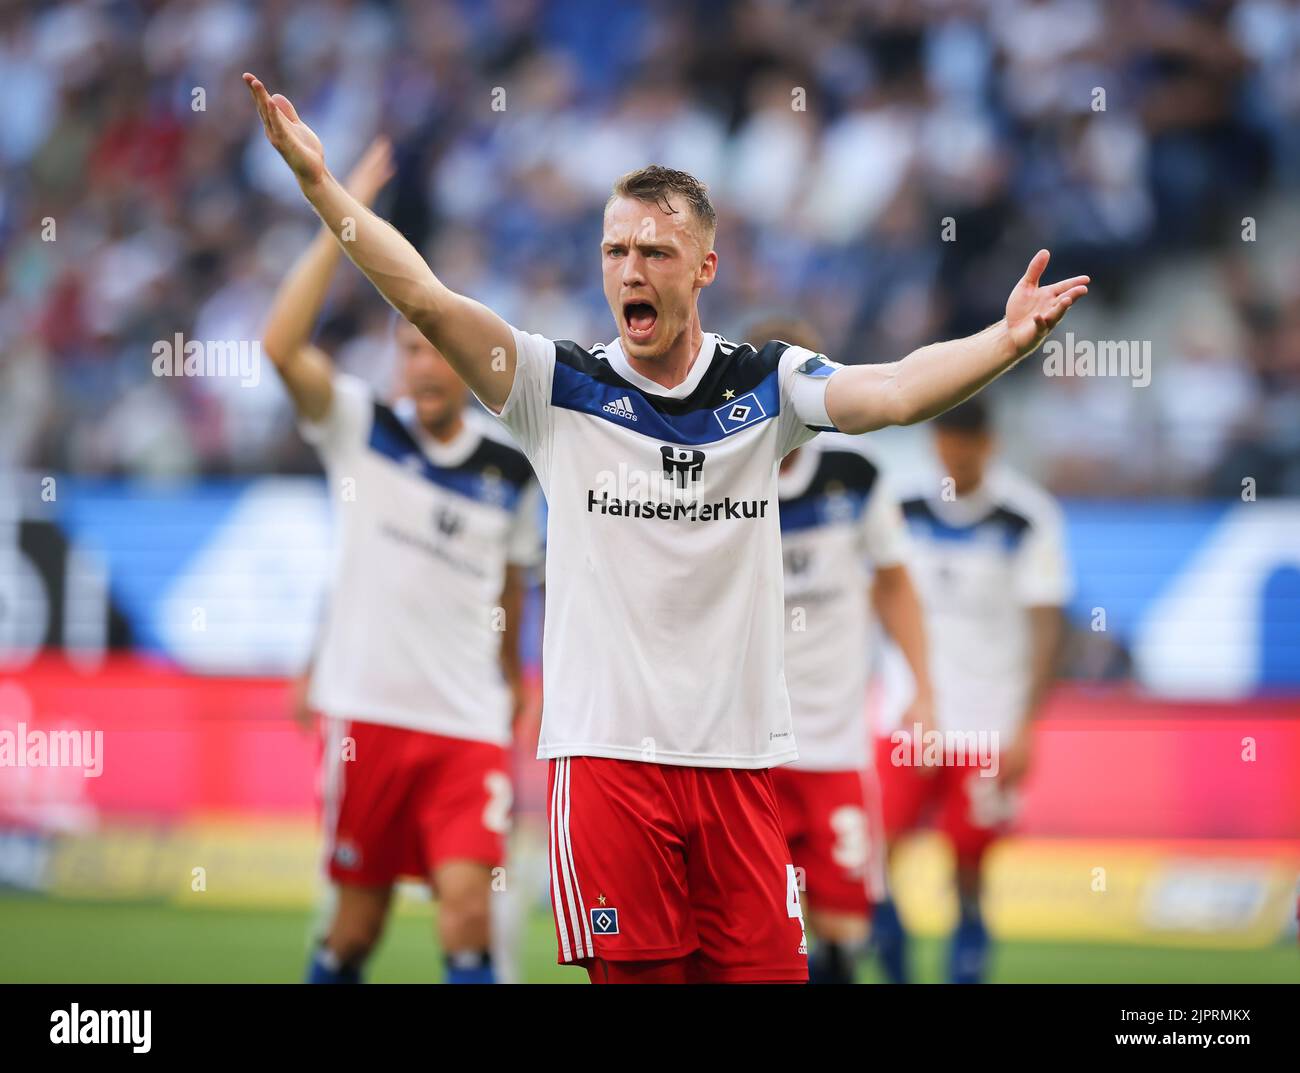 Hamburg, Germany. 19th Aug, 2022. Soccer: 2nd Bundesliga, Matchday 5, Hamburger SV - Darmstadt 98 at Volksparkstadion. Hamburg's Sebastian Schonlau gestures on the pitch. Credit: Christian Charisius/dpa - IMPORTANT NOTE: In accordance with the requirements of the DFL Deutsche Fußball Liga and the DFB Deutscher Fußball-Bund, it is prohibited to use or have used photographs taken in the stadium and/or of the match in the form of sequence pictures and/or video-like photo series./dpa/Alamy Live News Stock Photo